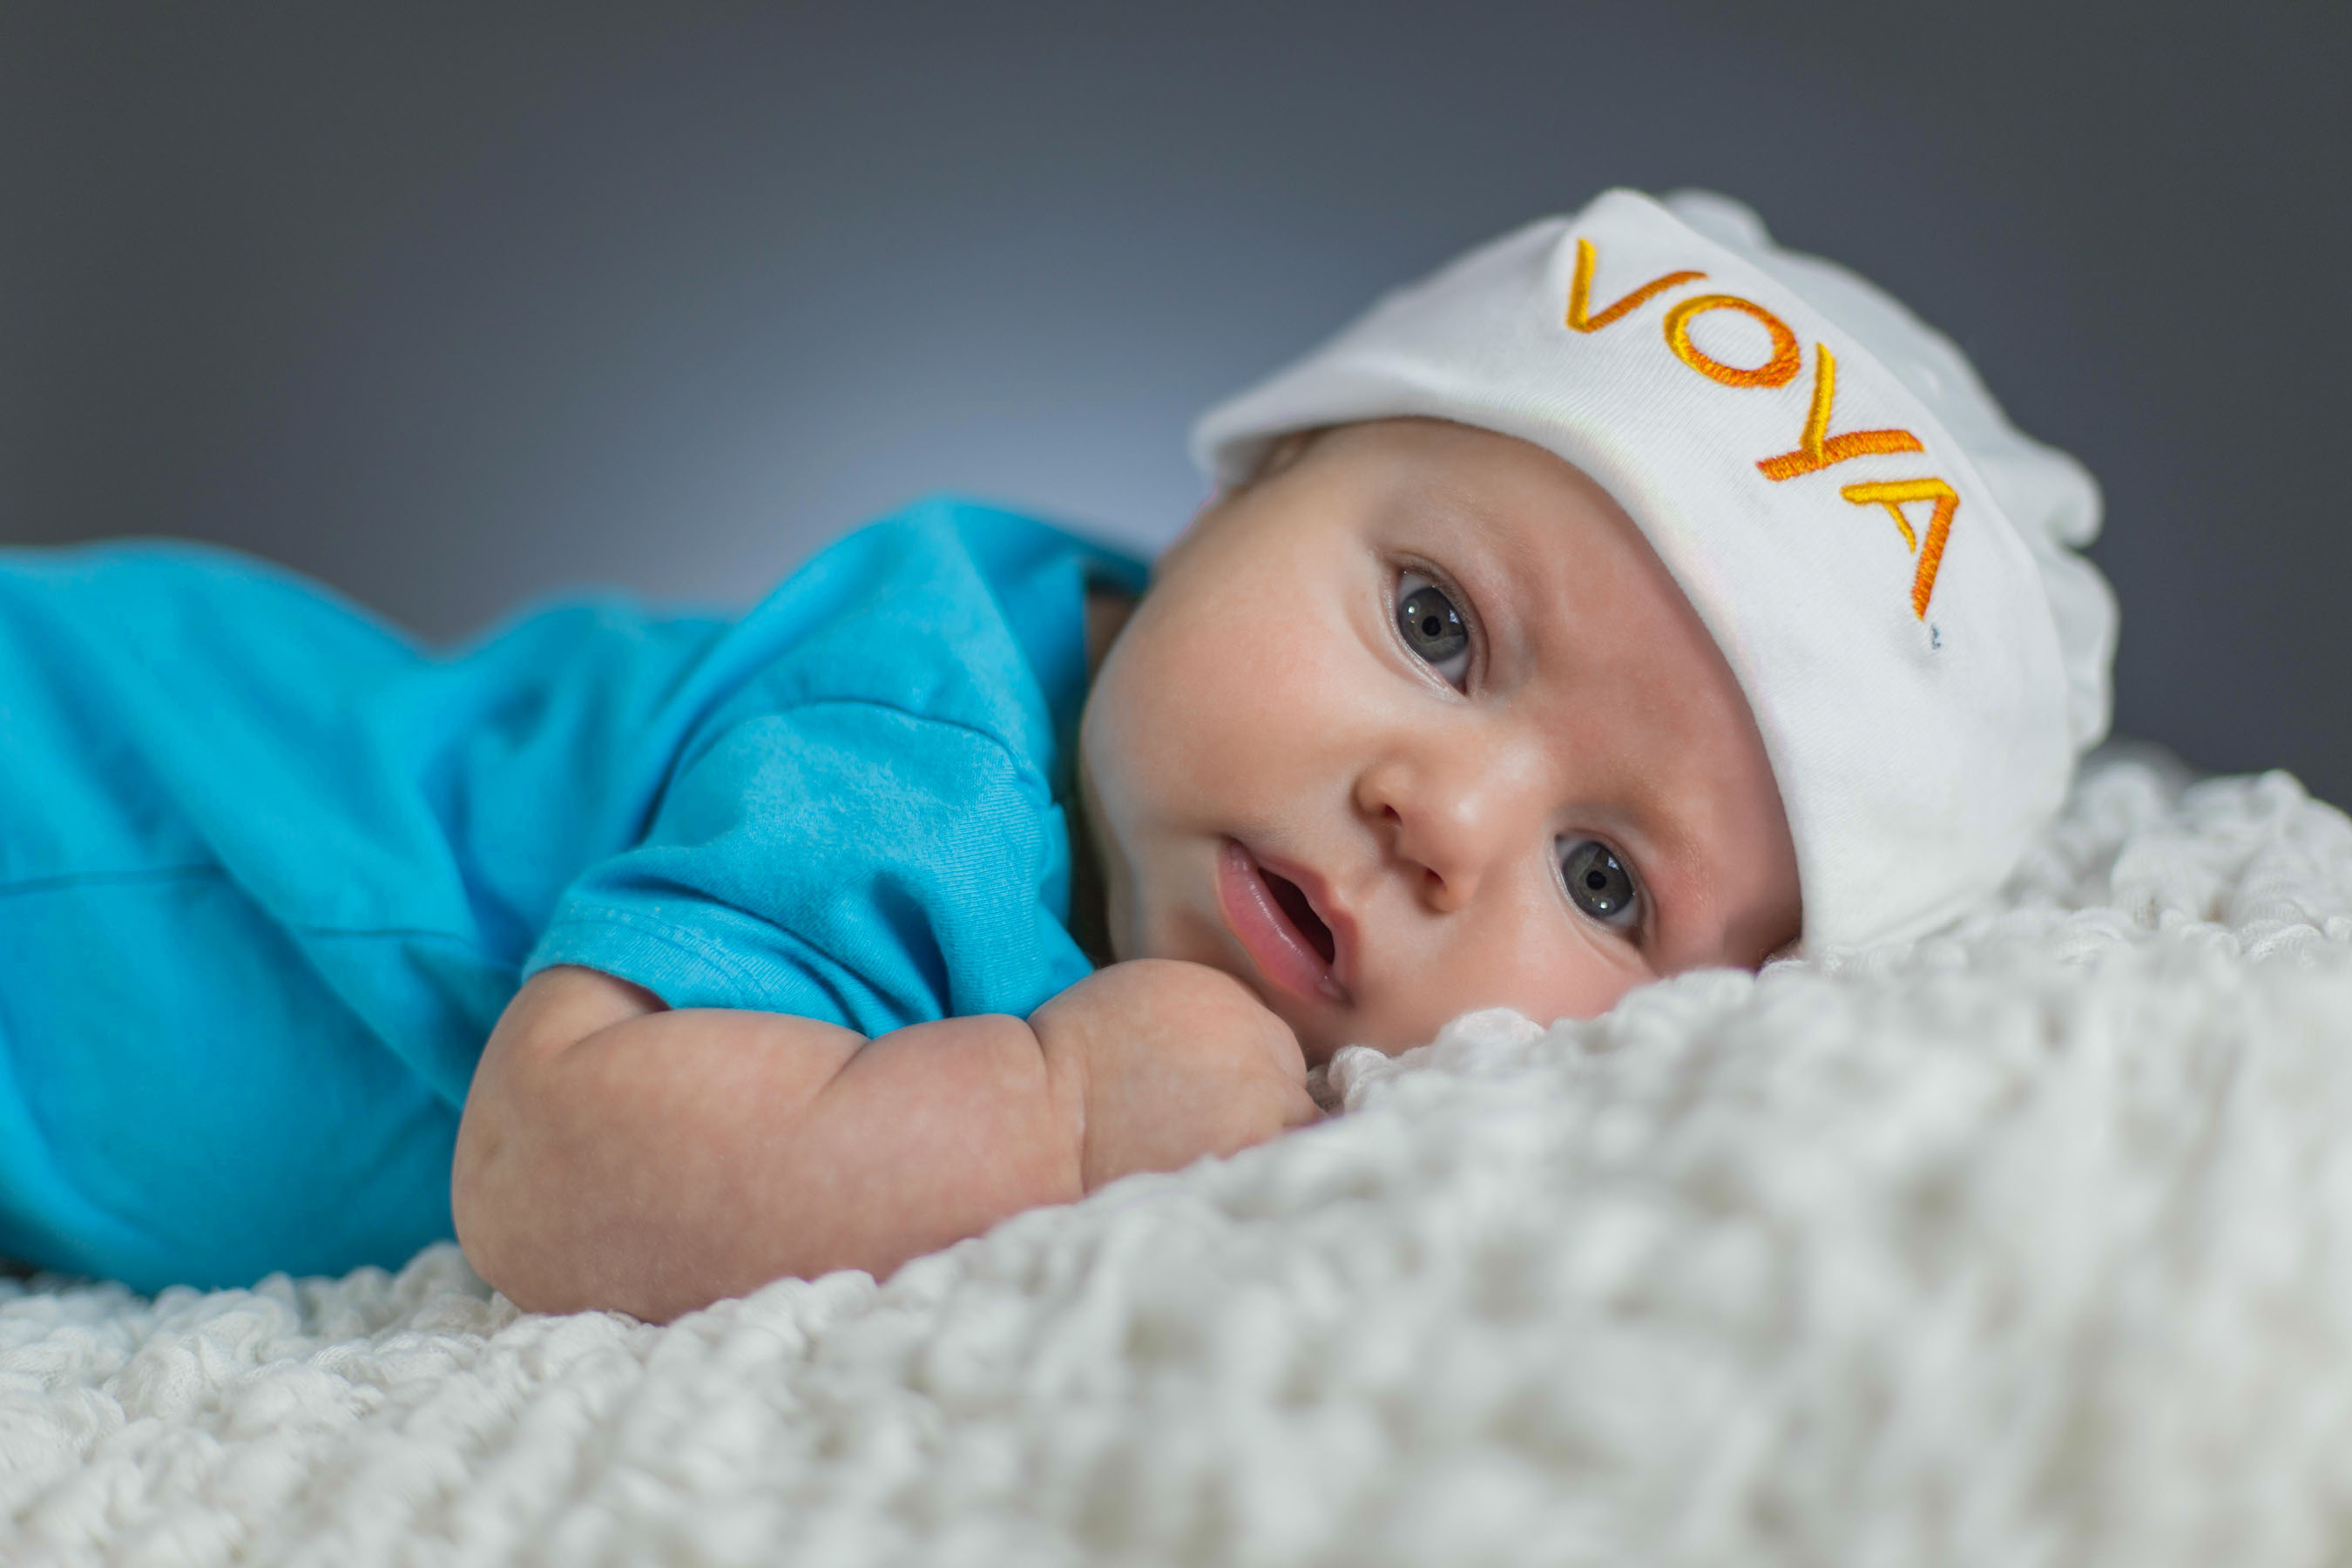 On average, more than 10,000 babies are born each day in the United States. The Voya Born to Save™ program is helping the next generation on the path to retirement readiness.